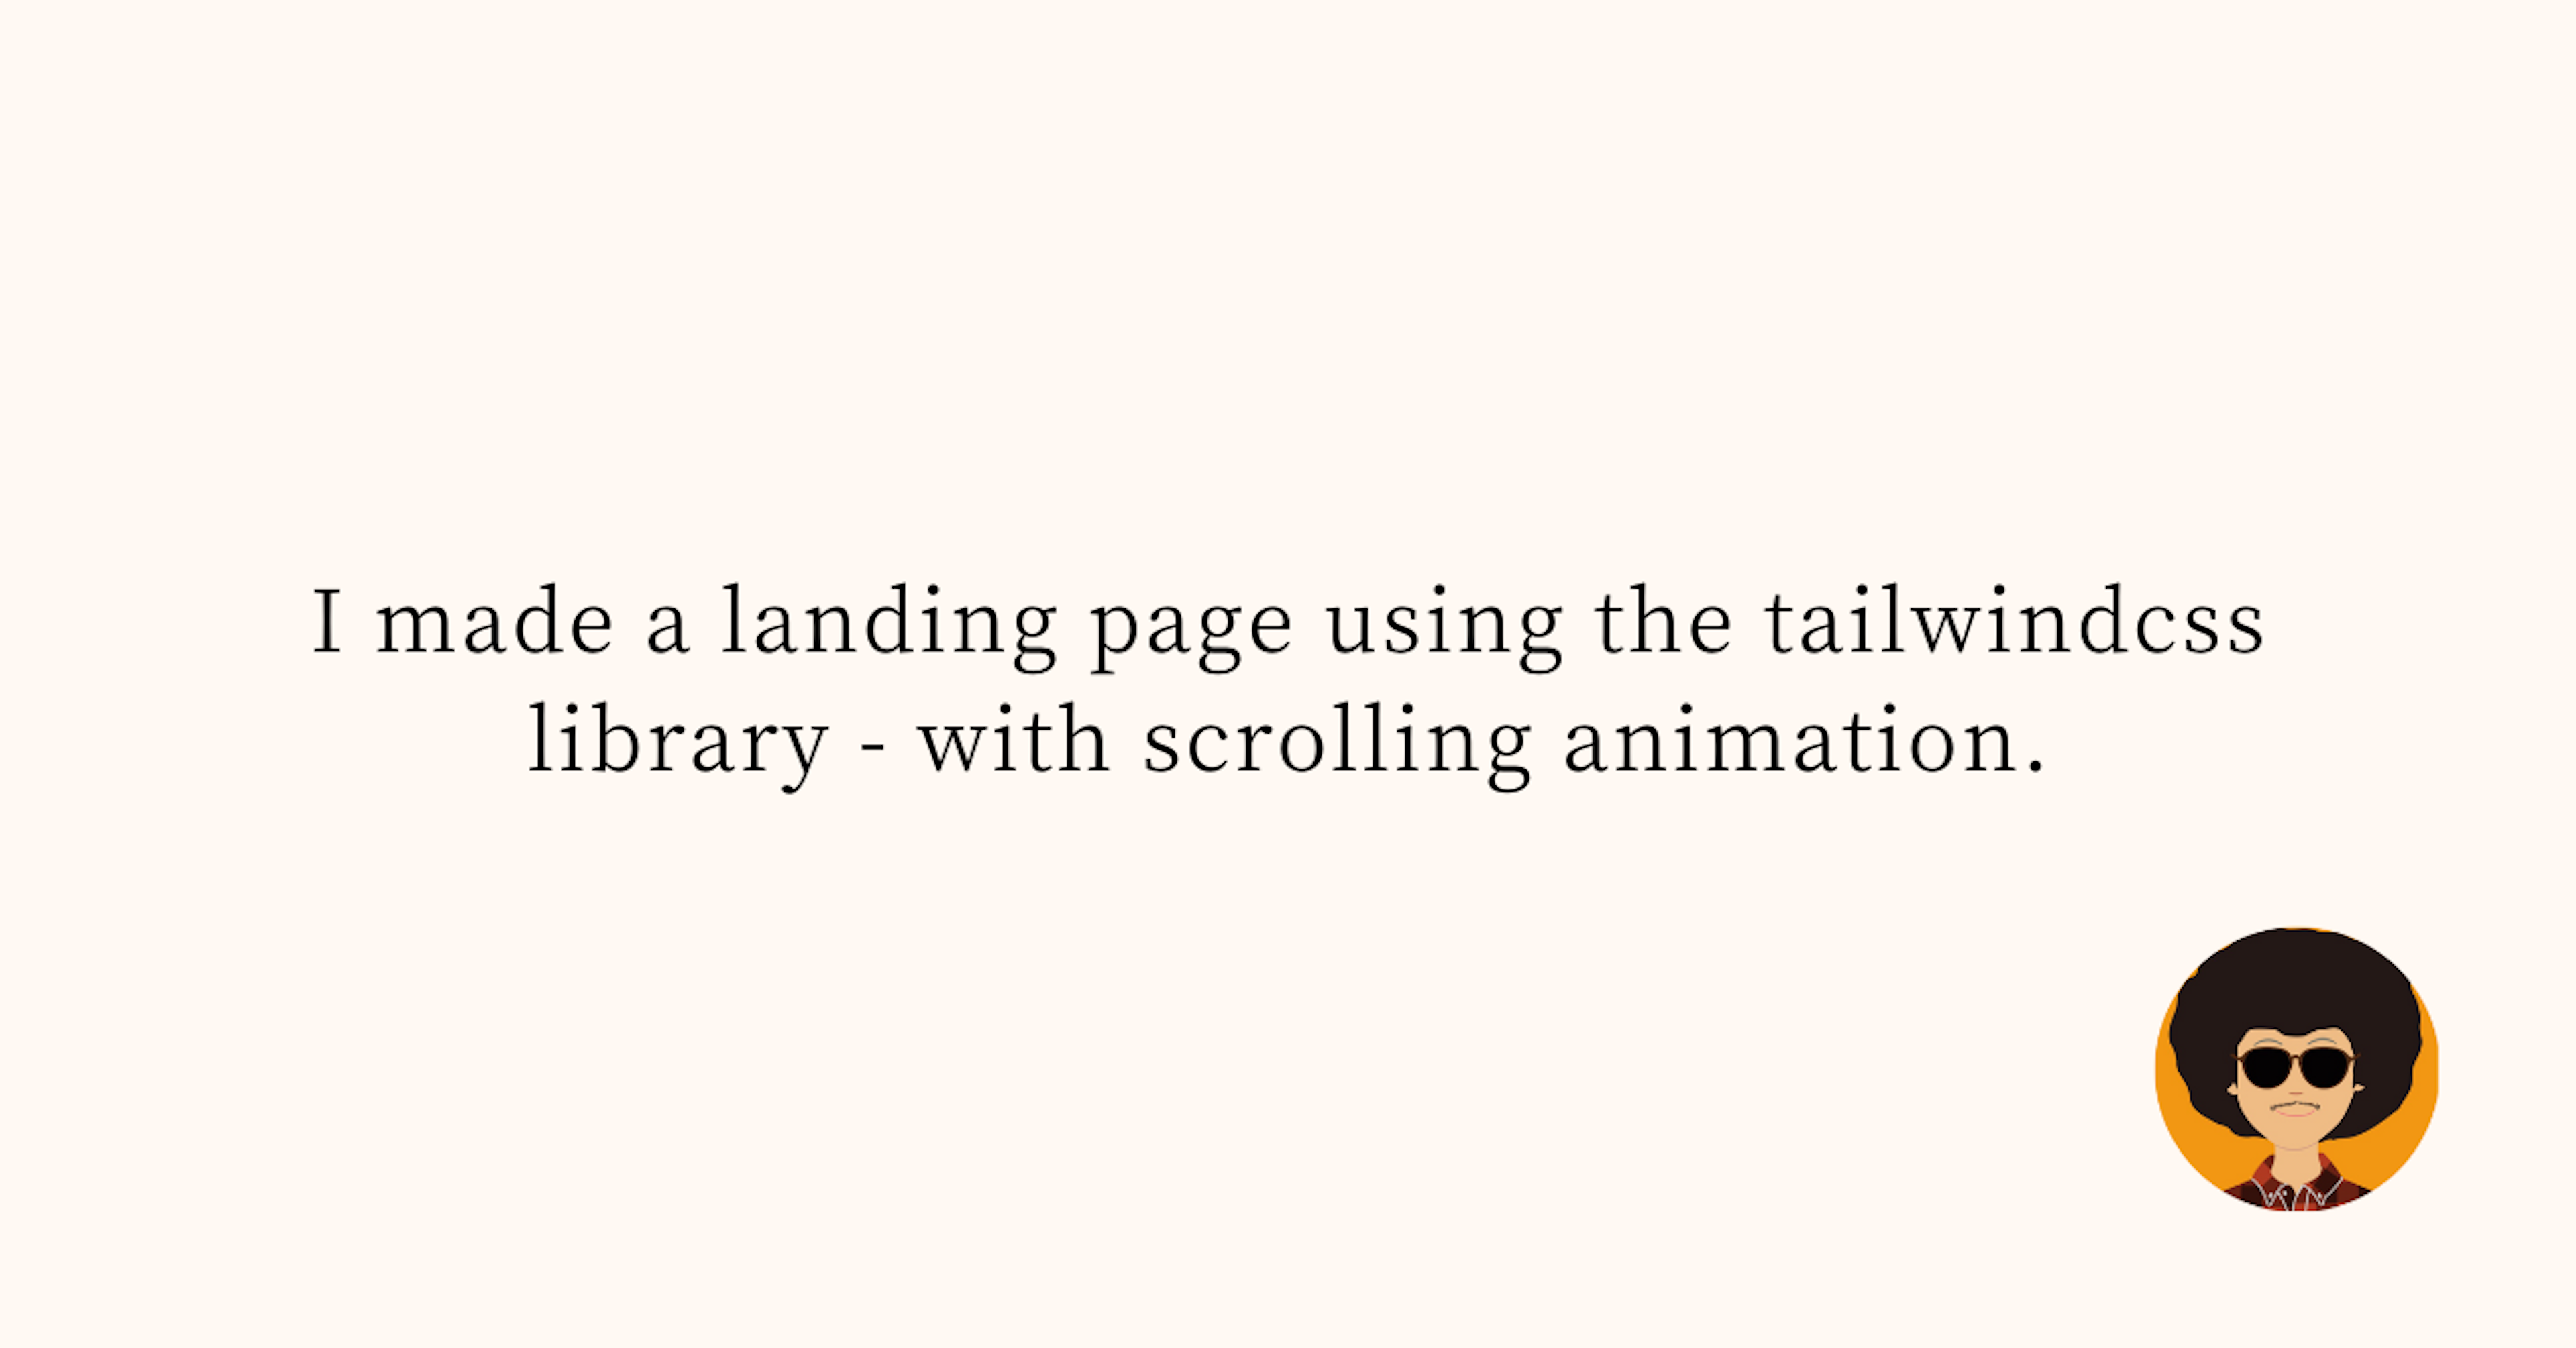 I made a landing page using the tailwindcss library - with scrolling animation.